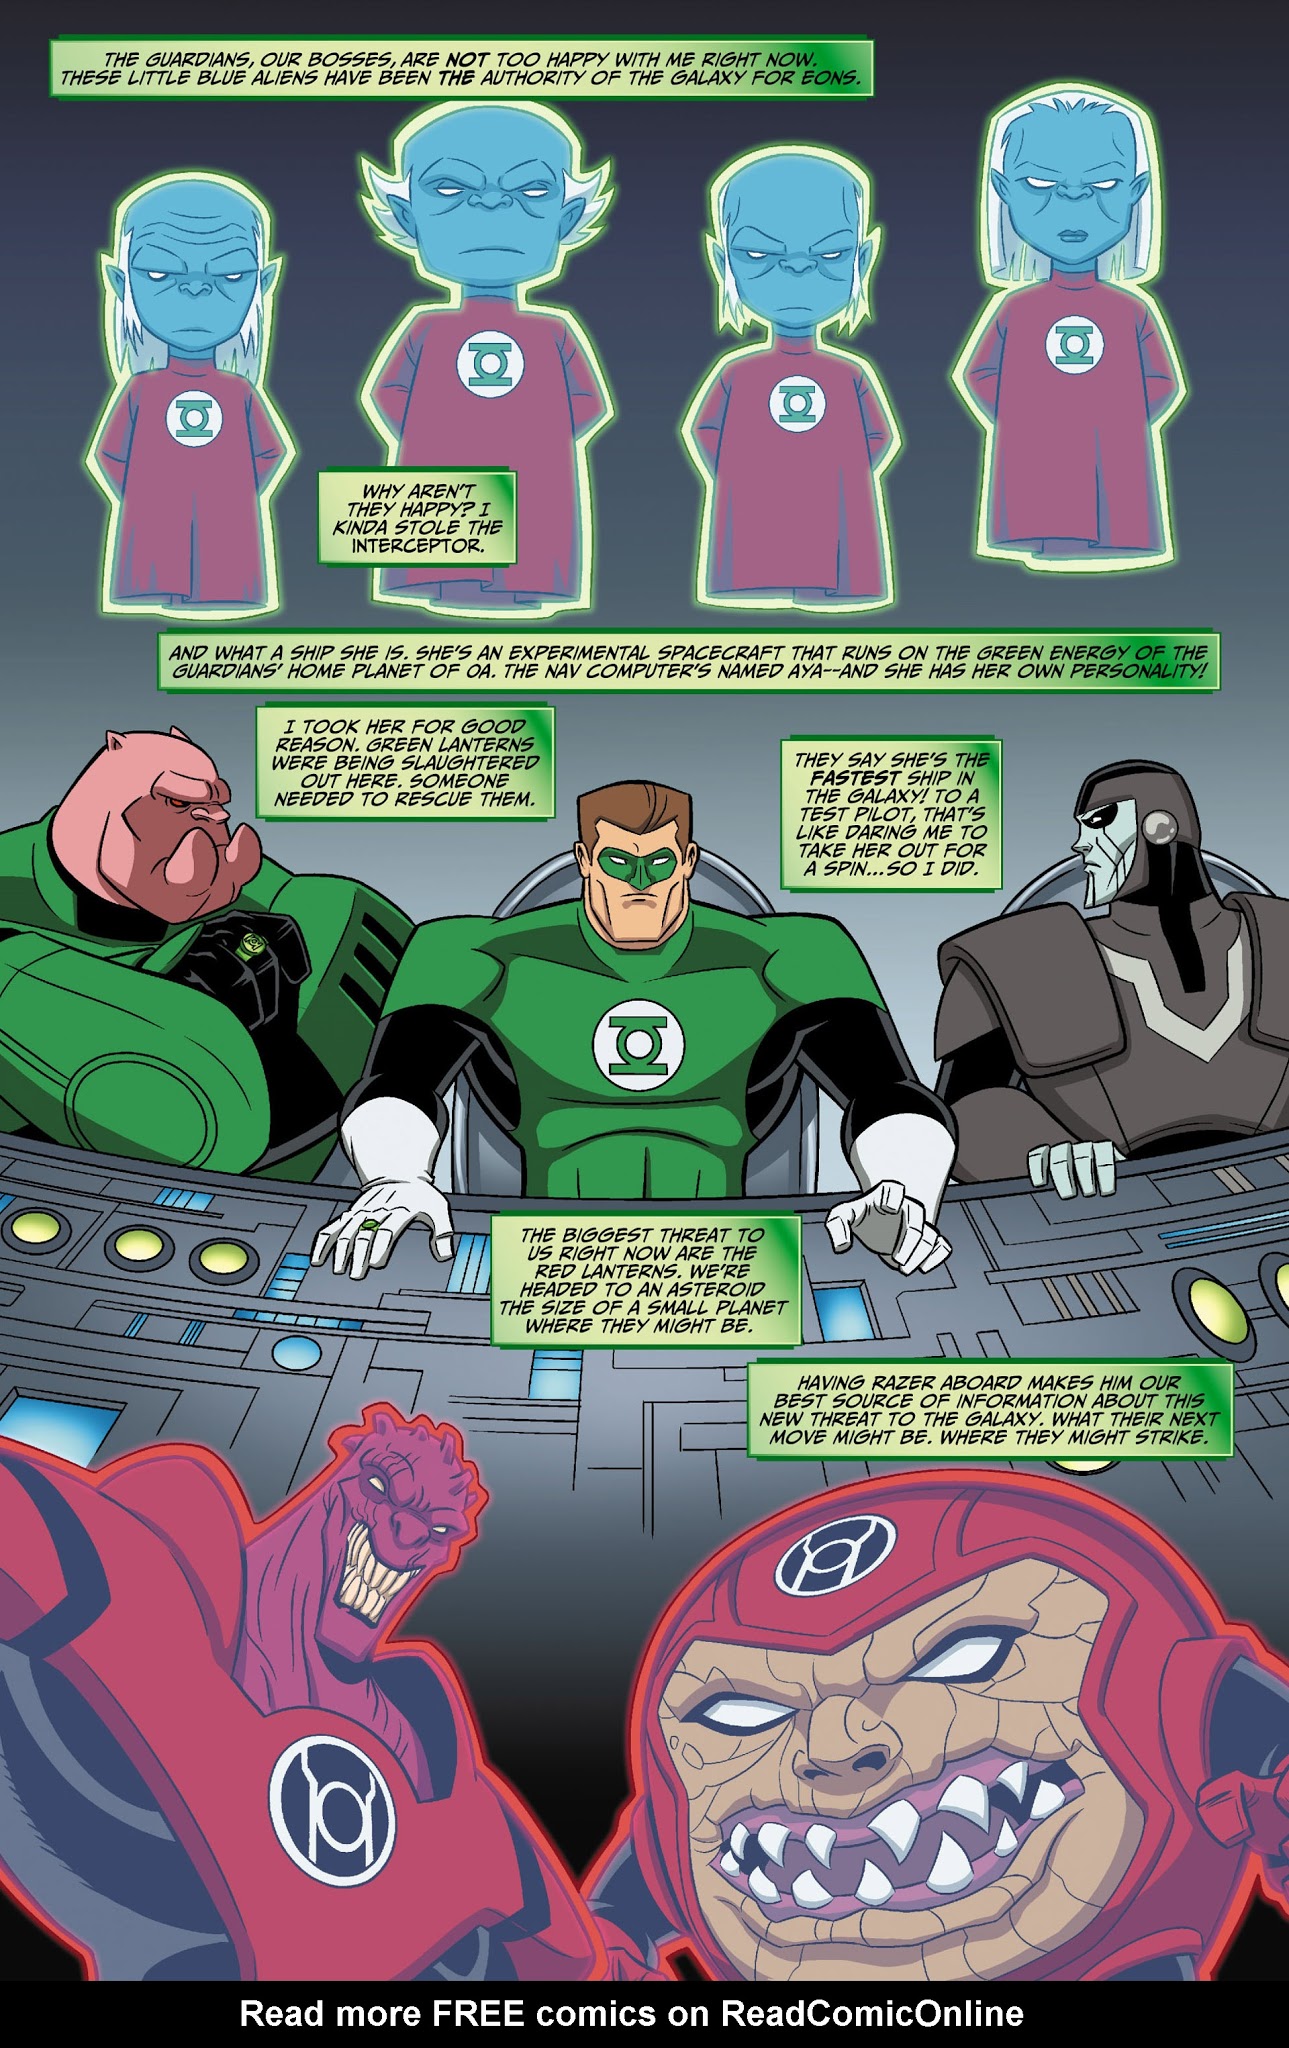 Green Lantern The Animated Series Issue 2 | Read Green Lantern The Animated  Series Issue 2 comic online in high quality. Read Full Comic online for  free - Read comics online in